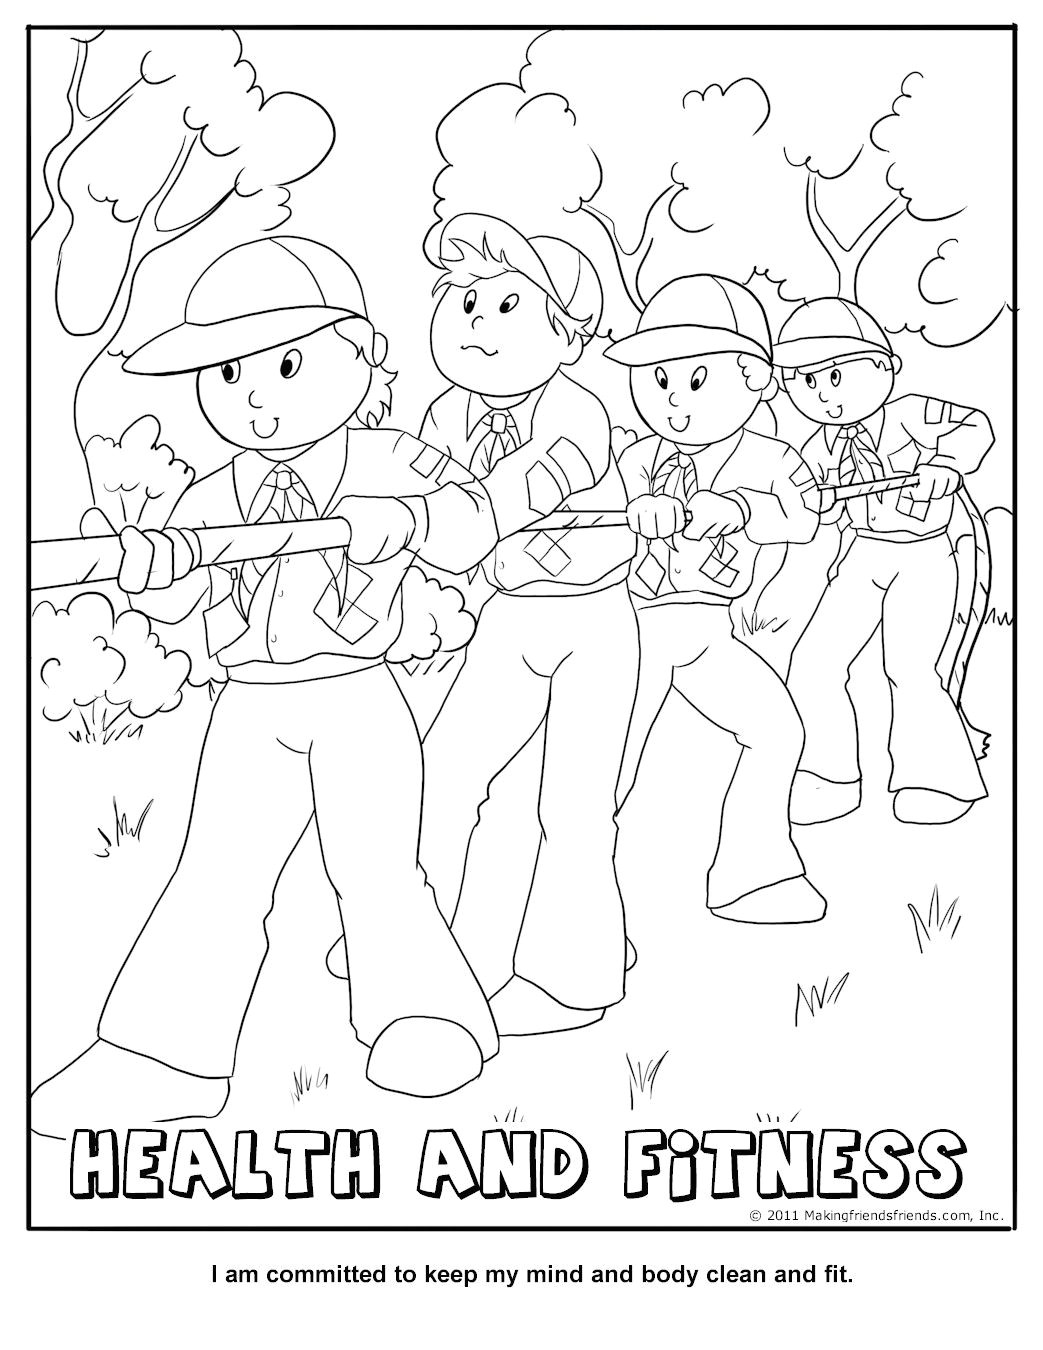 health and fitness coloring page wolf cub achievement 1 feats of skill and elective 20 sports